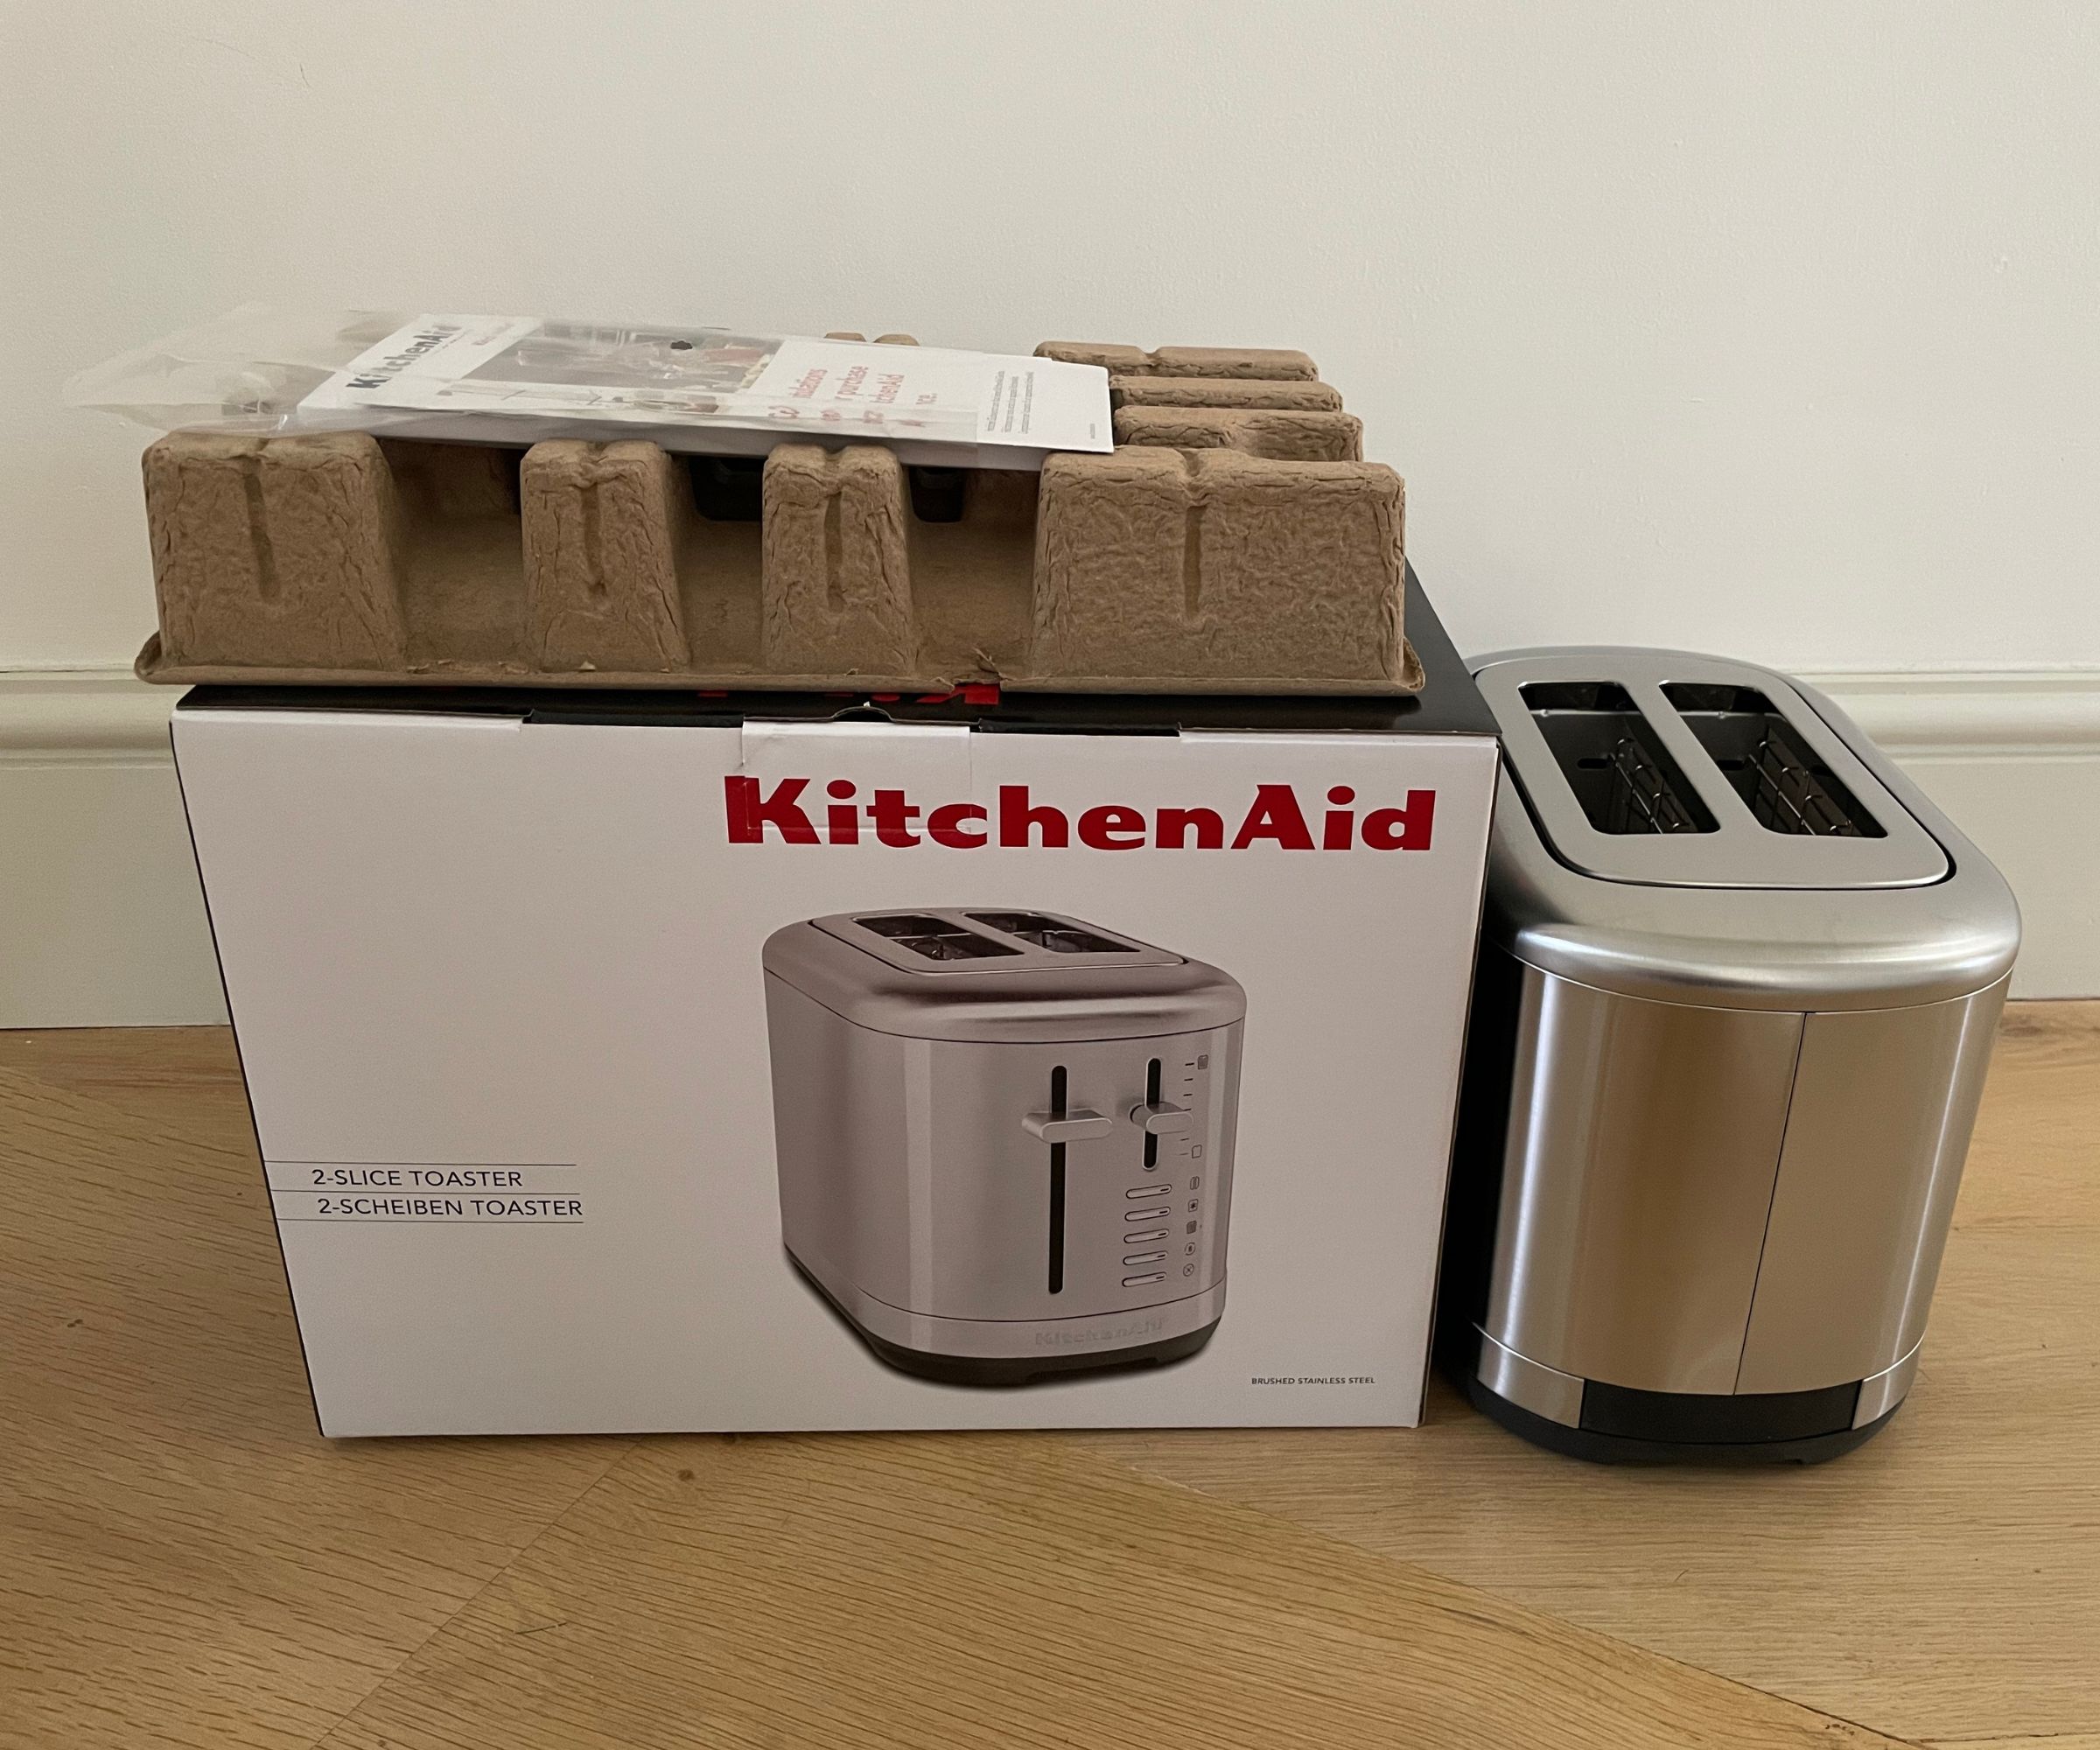 KitchenAid 2 Slice Manual Lift Toaster unboxed with the packaging at the side of it